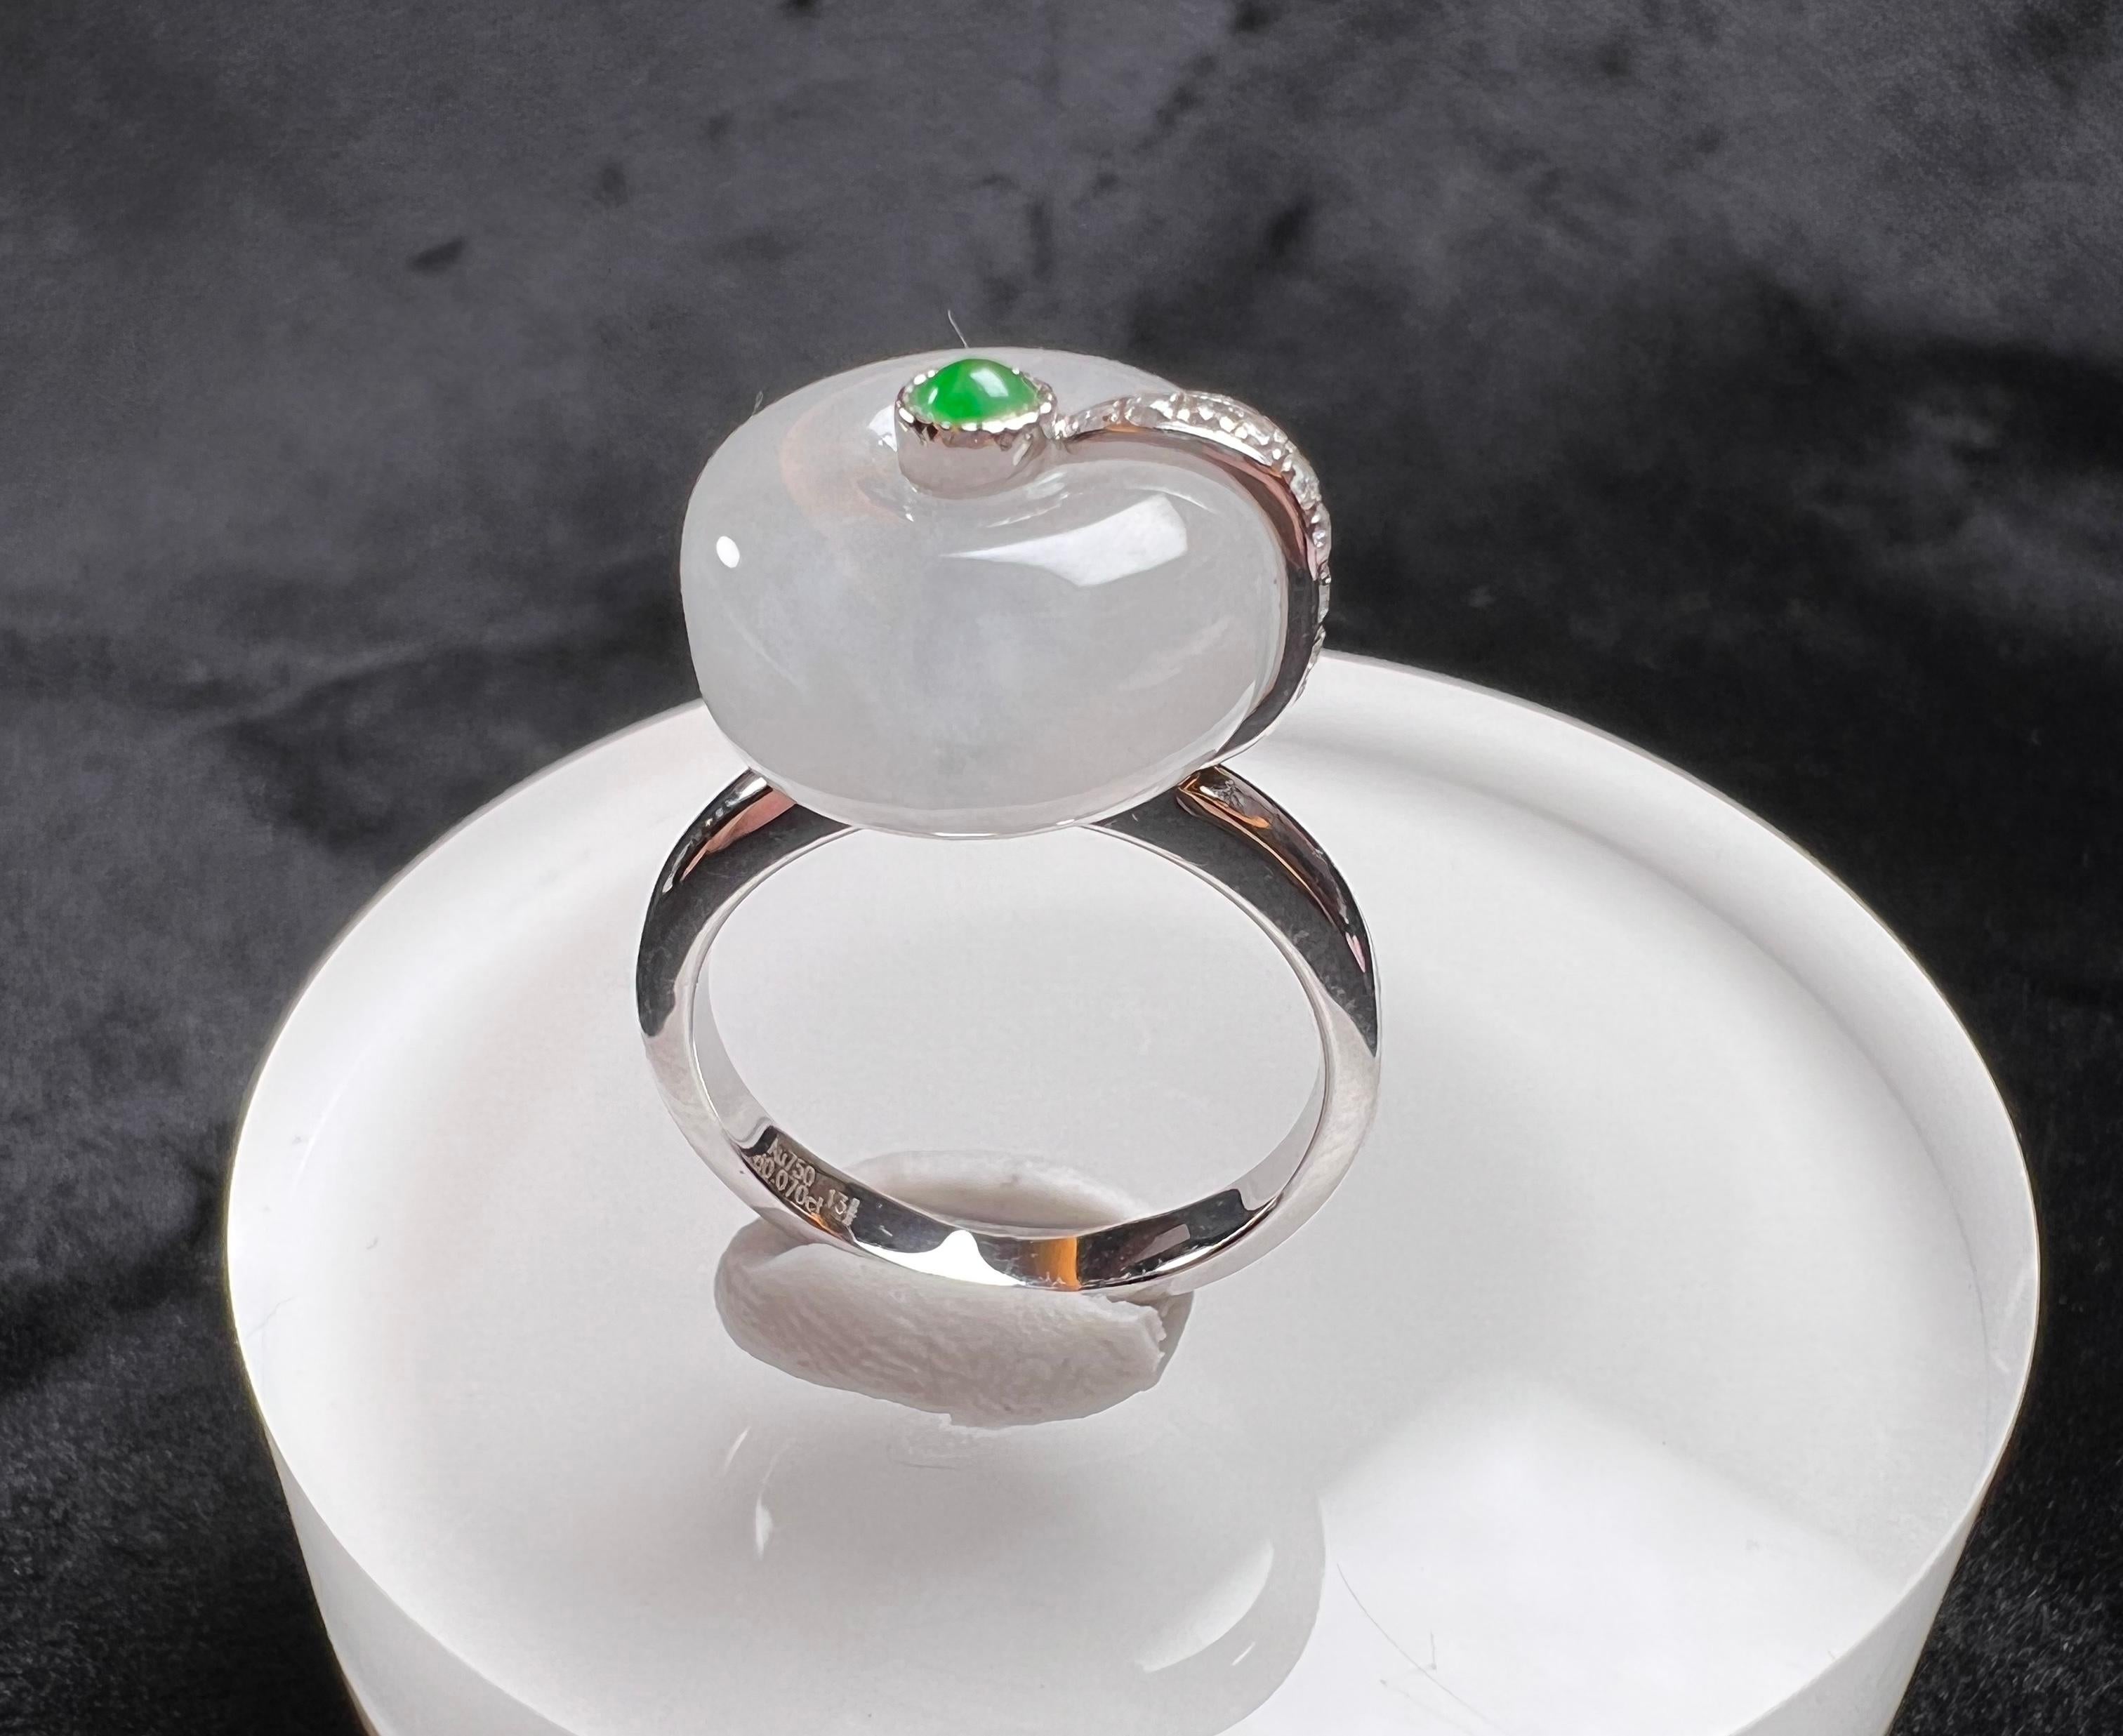 18K White Gold Icy Jadeite Green Jadeite Apple Ring, Cocktail ring

Size: M 1/2 (UK) / 6.5 (US)
Circumference (approx.): 53mm
Diameter (approx.): 16.9mm

Total weight (approx.): 6.5g

Icy jadeite measurement (approx.): 13.5*7.5mm
Green jadeite